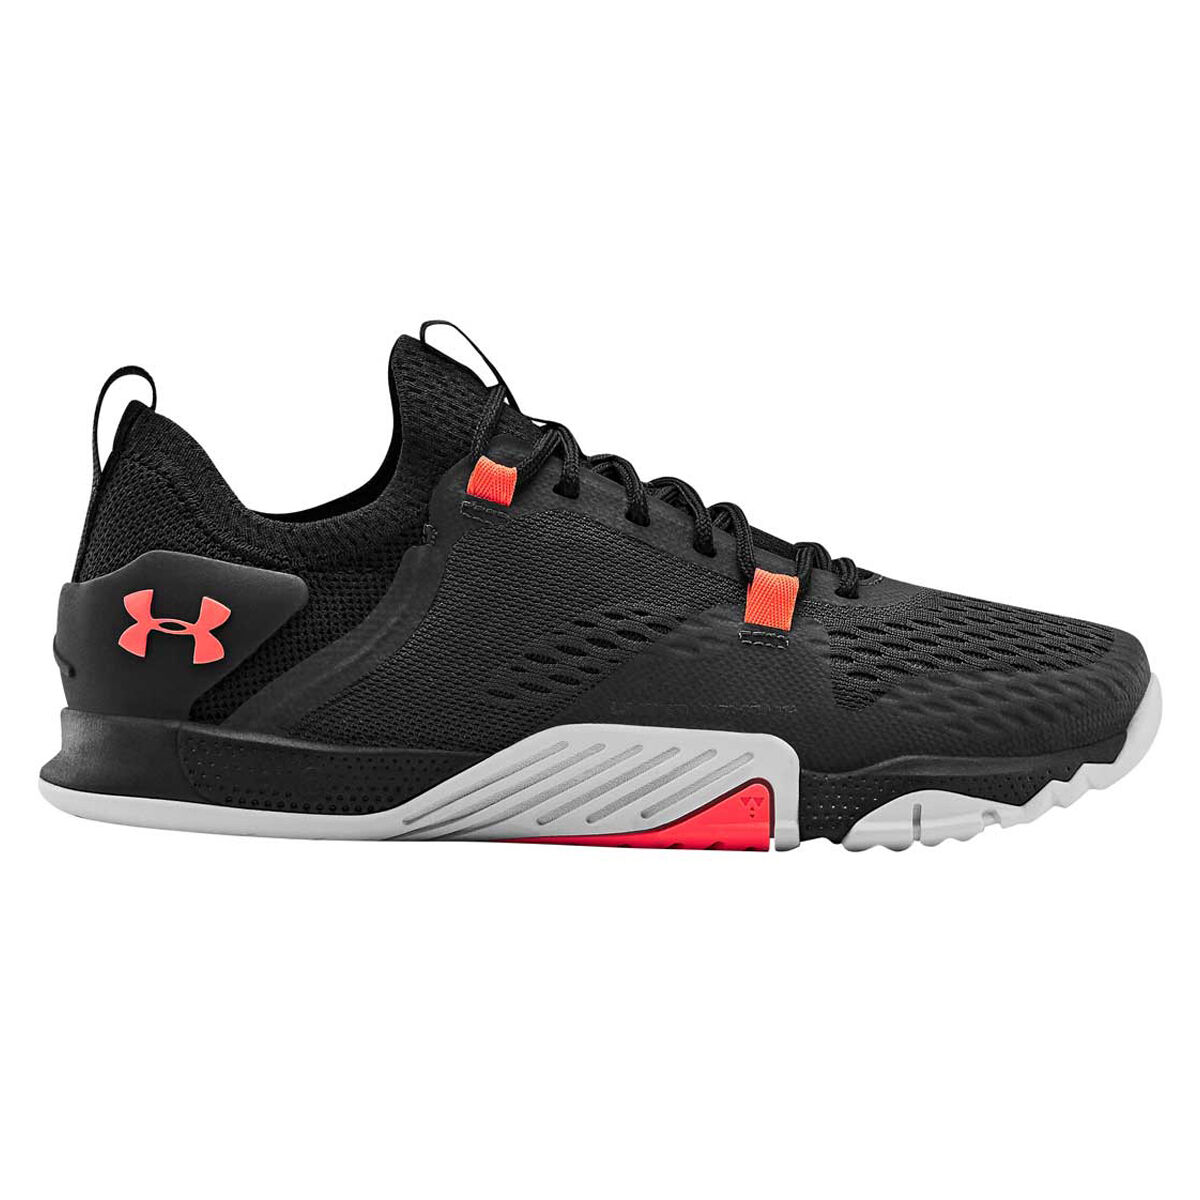 under armour women's tribase training shoes